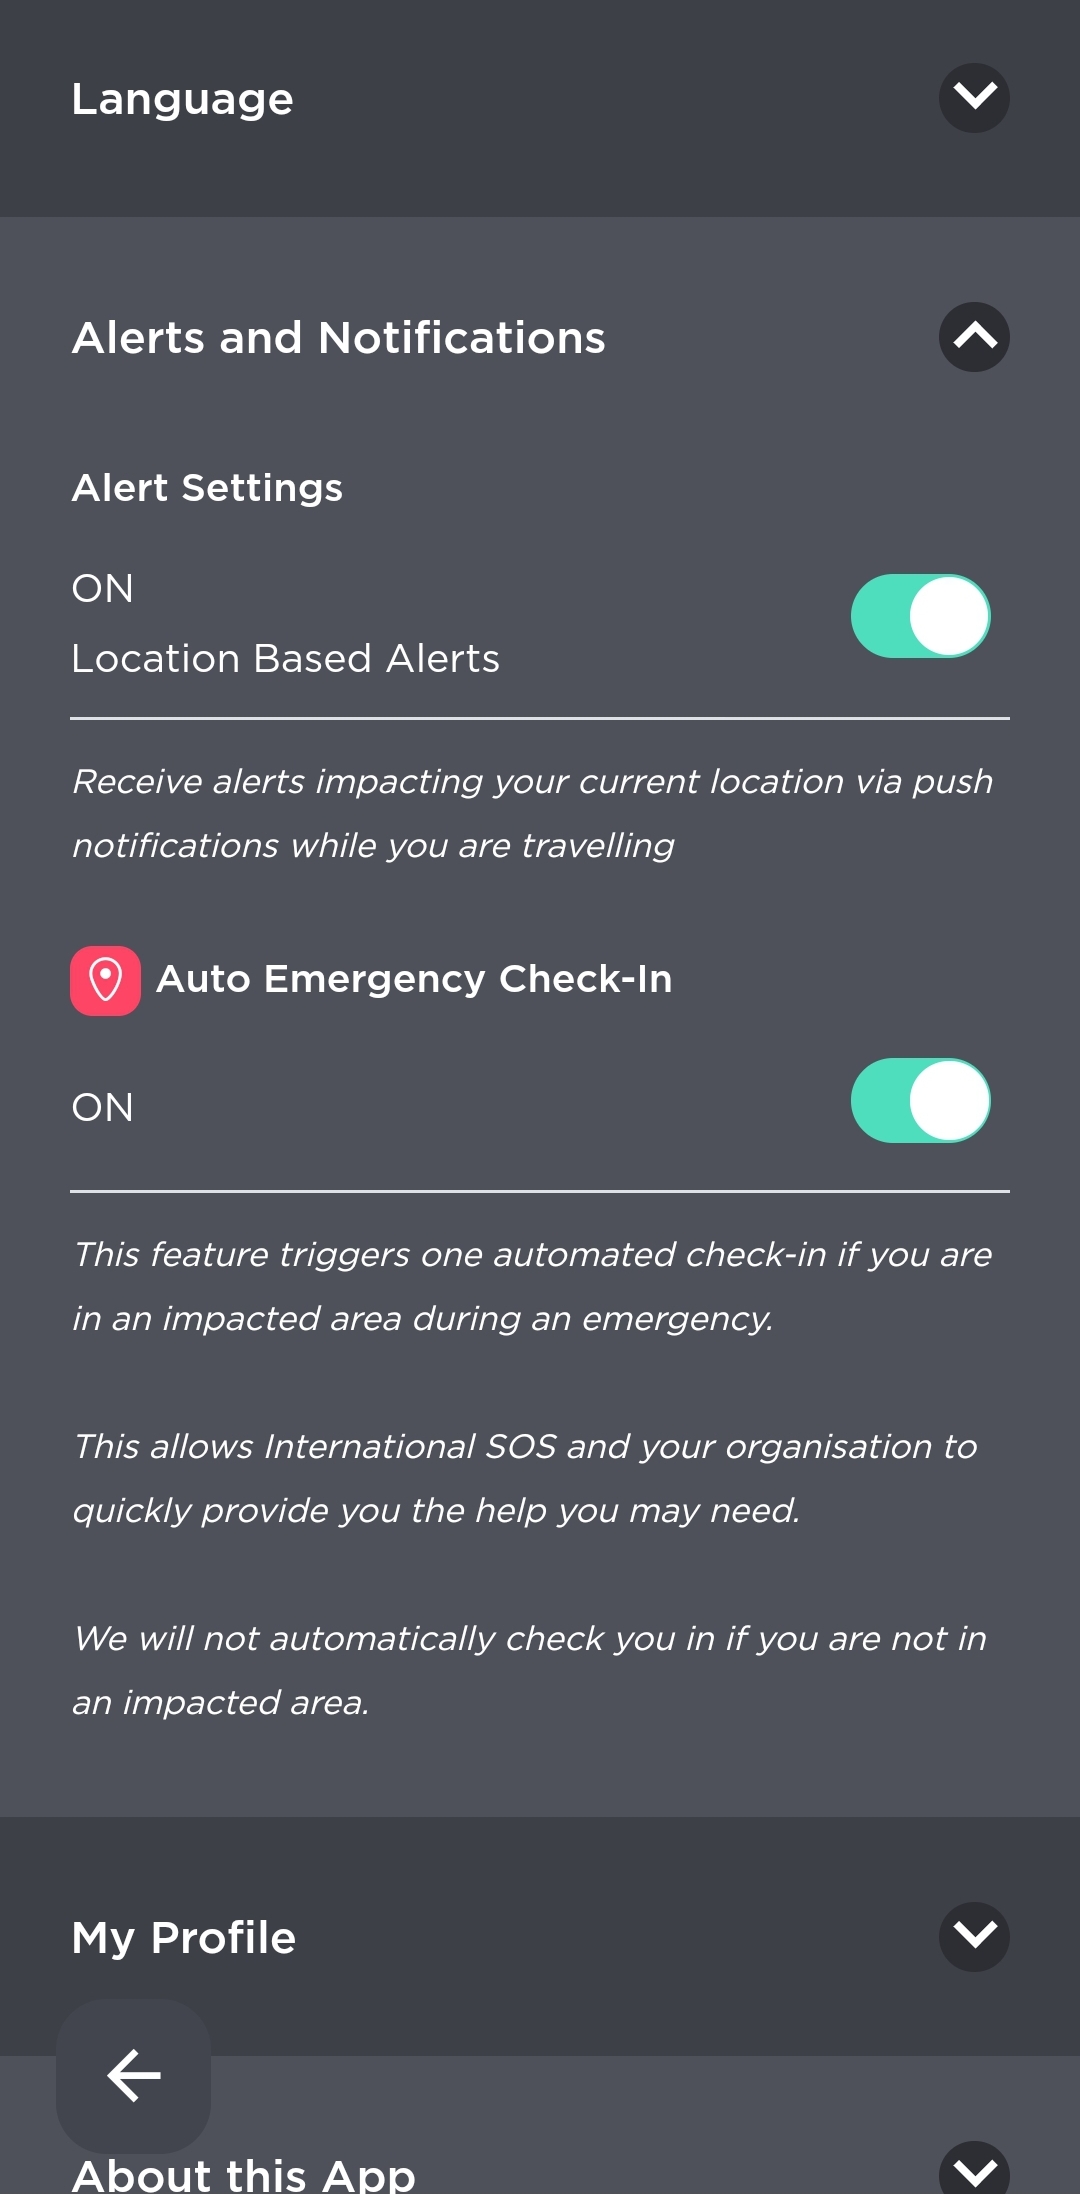 App Settings Screen with Alerts and Notifications Expanded